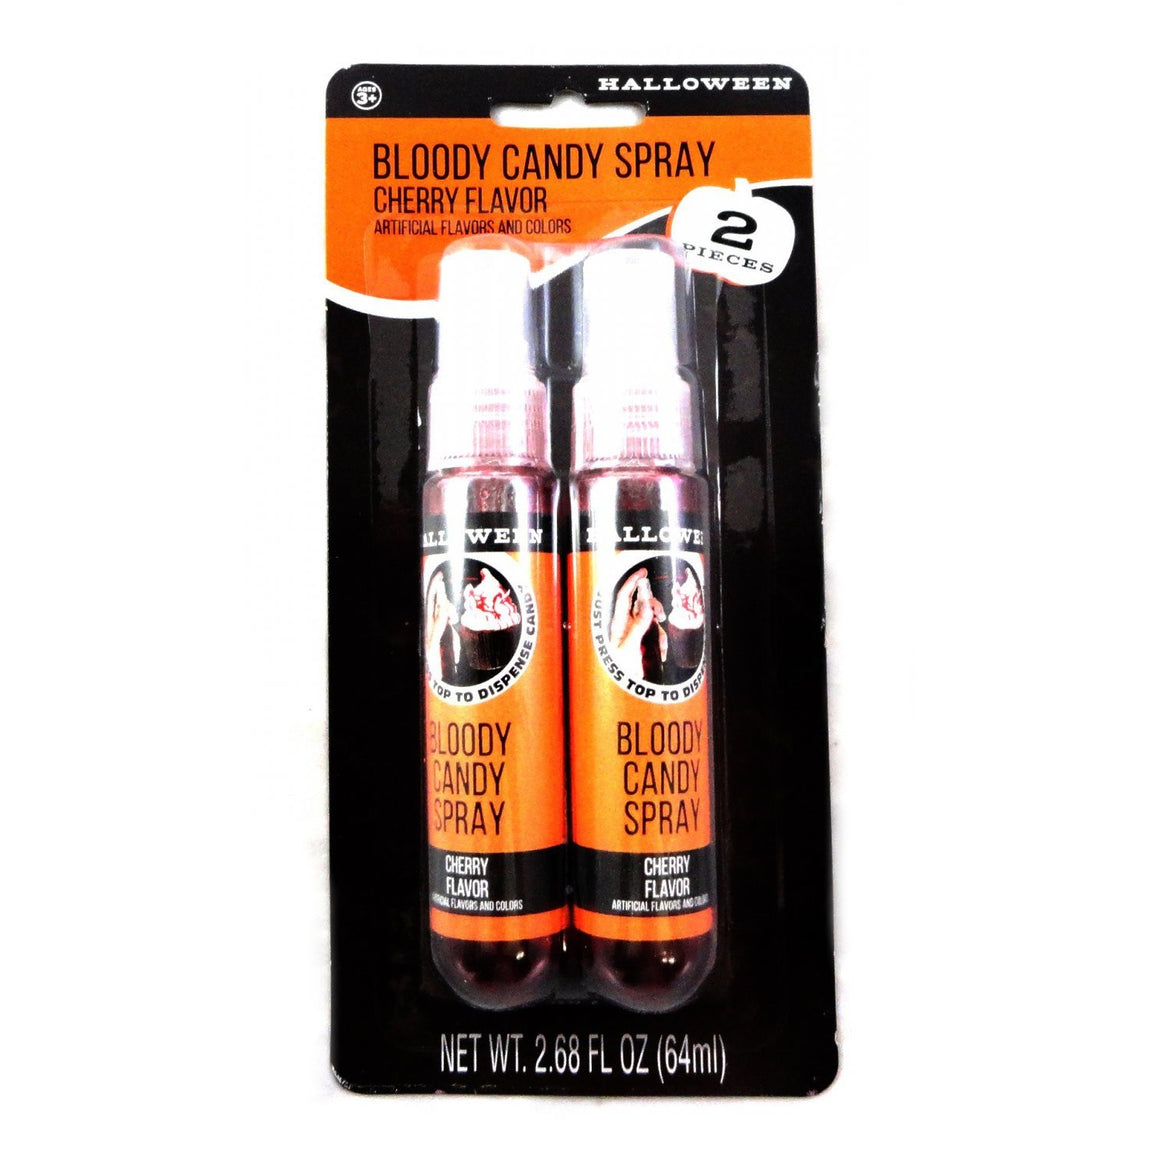 All City Candy Halloween Bloody Candy Spray 2 pc. 2.68 oz. Case of 6 Halloween Hilco For fresh candy and great service, visit www.allcitycandy.com